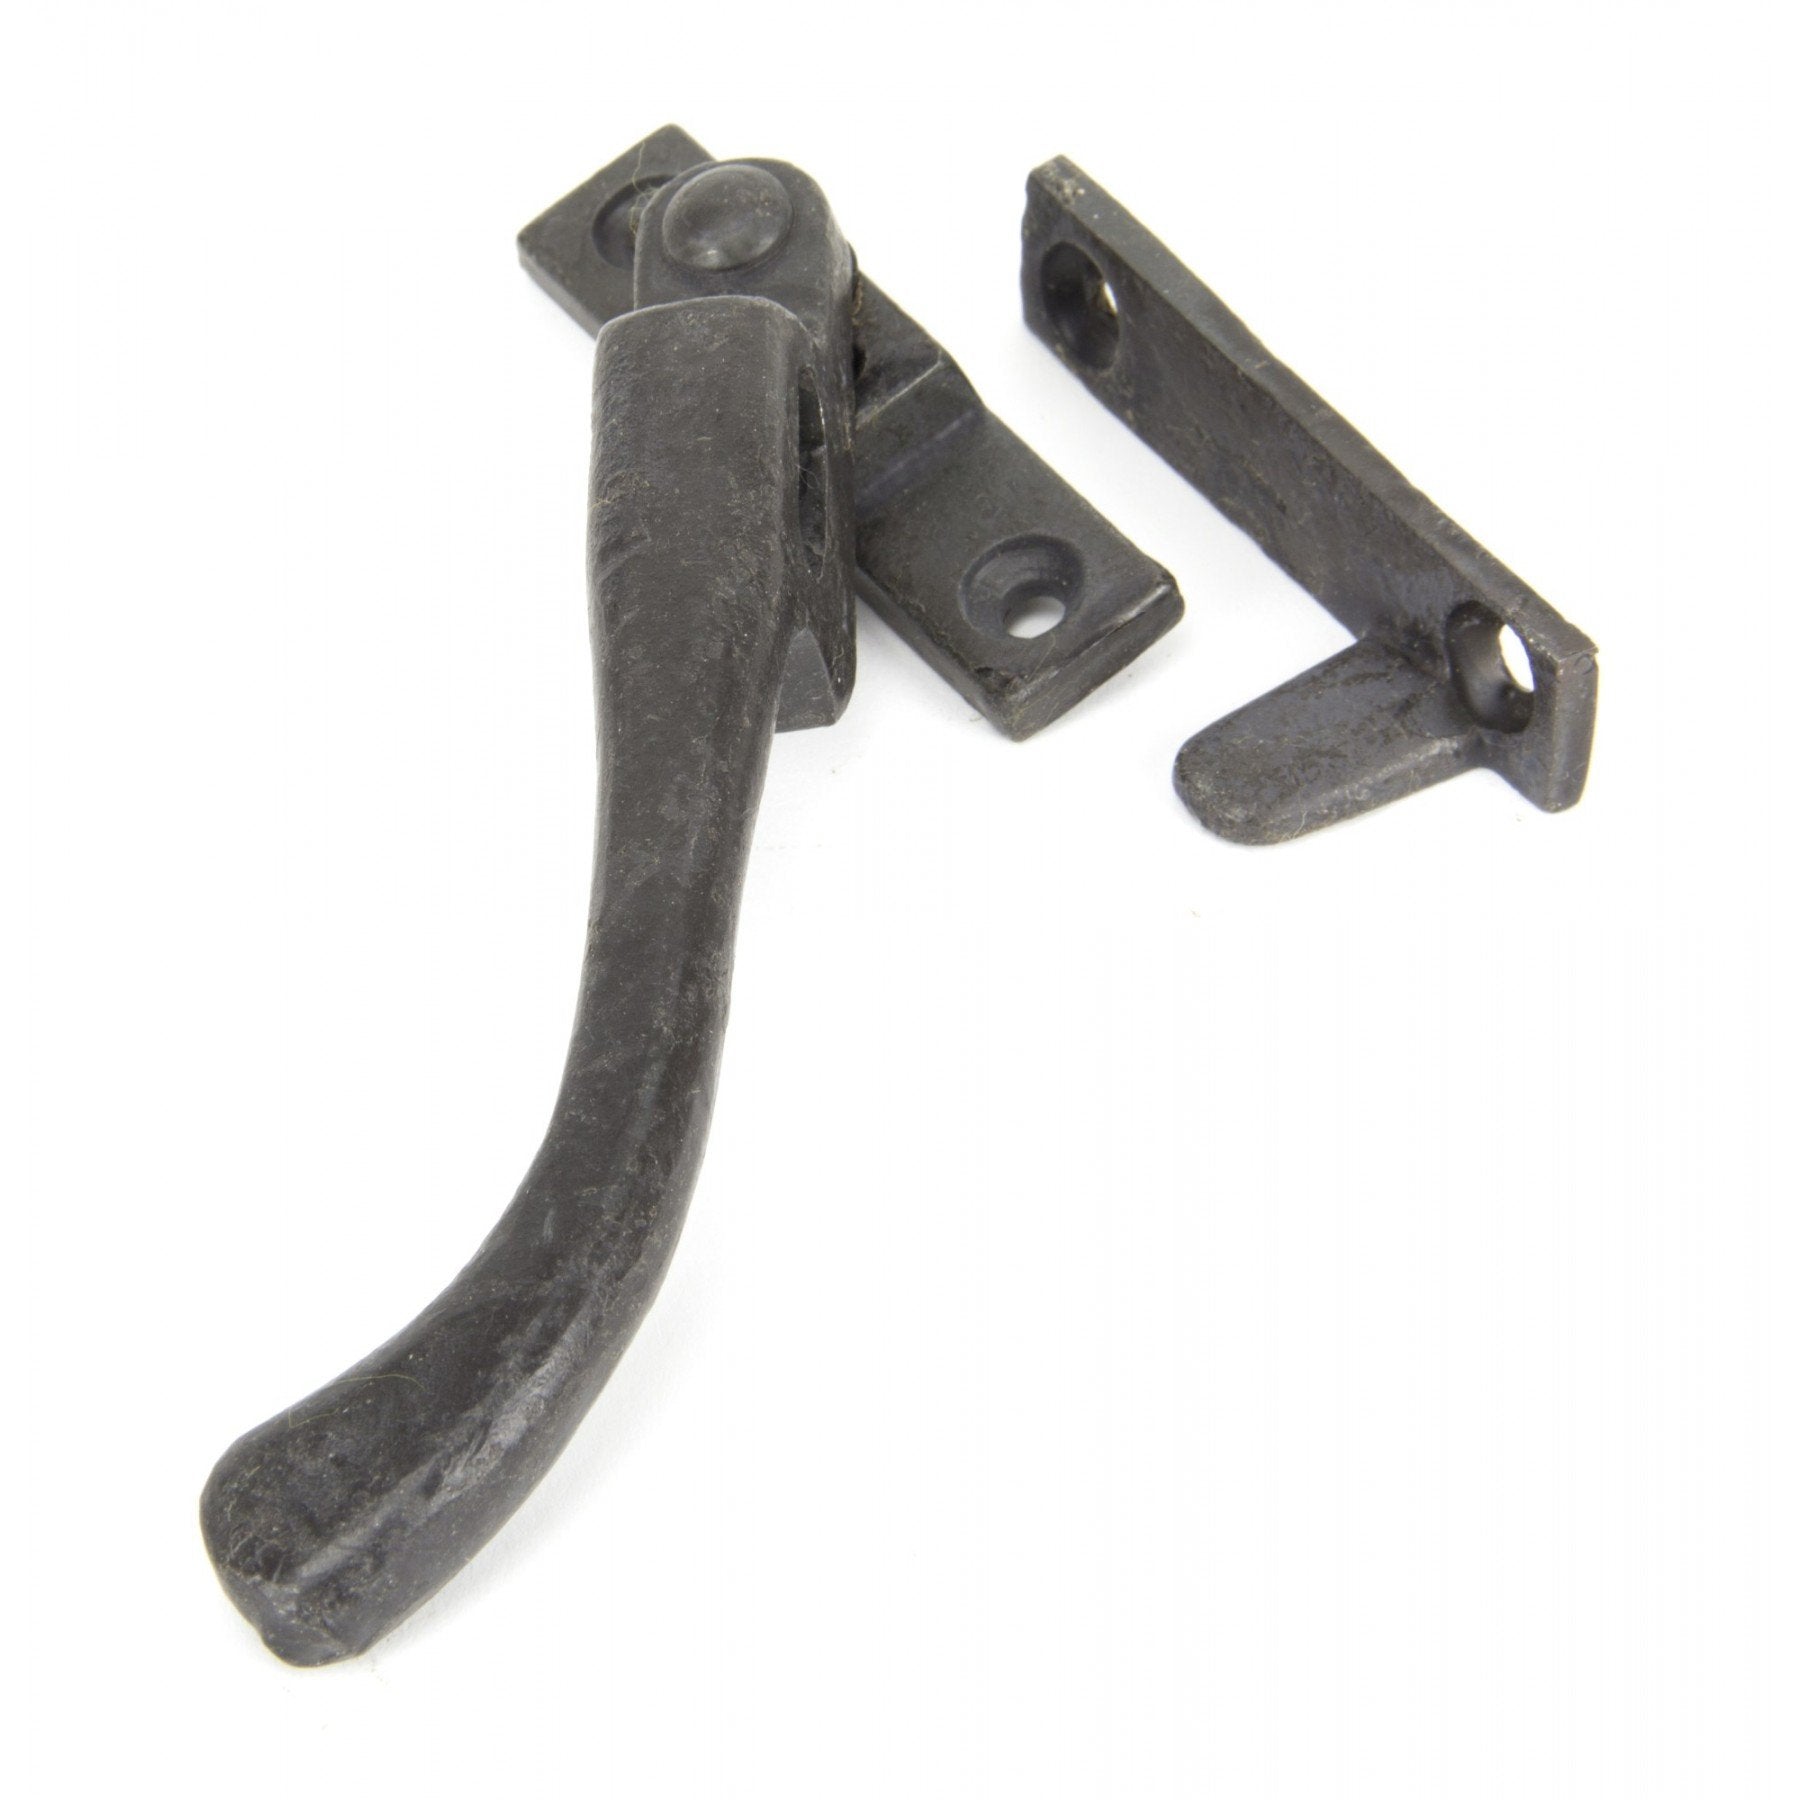 From the Anvil Beeswax Night Vent Fastener LH - Locking